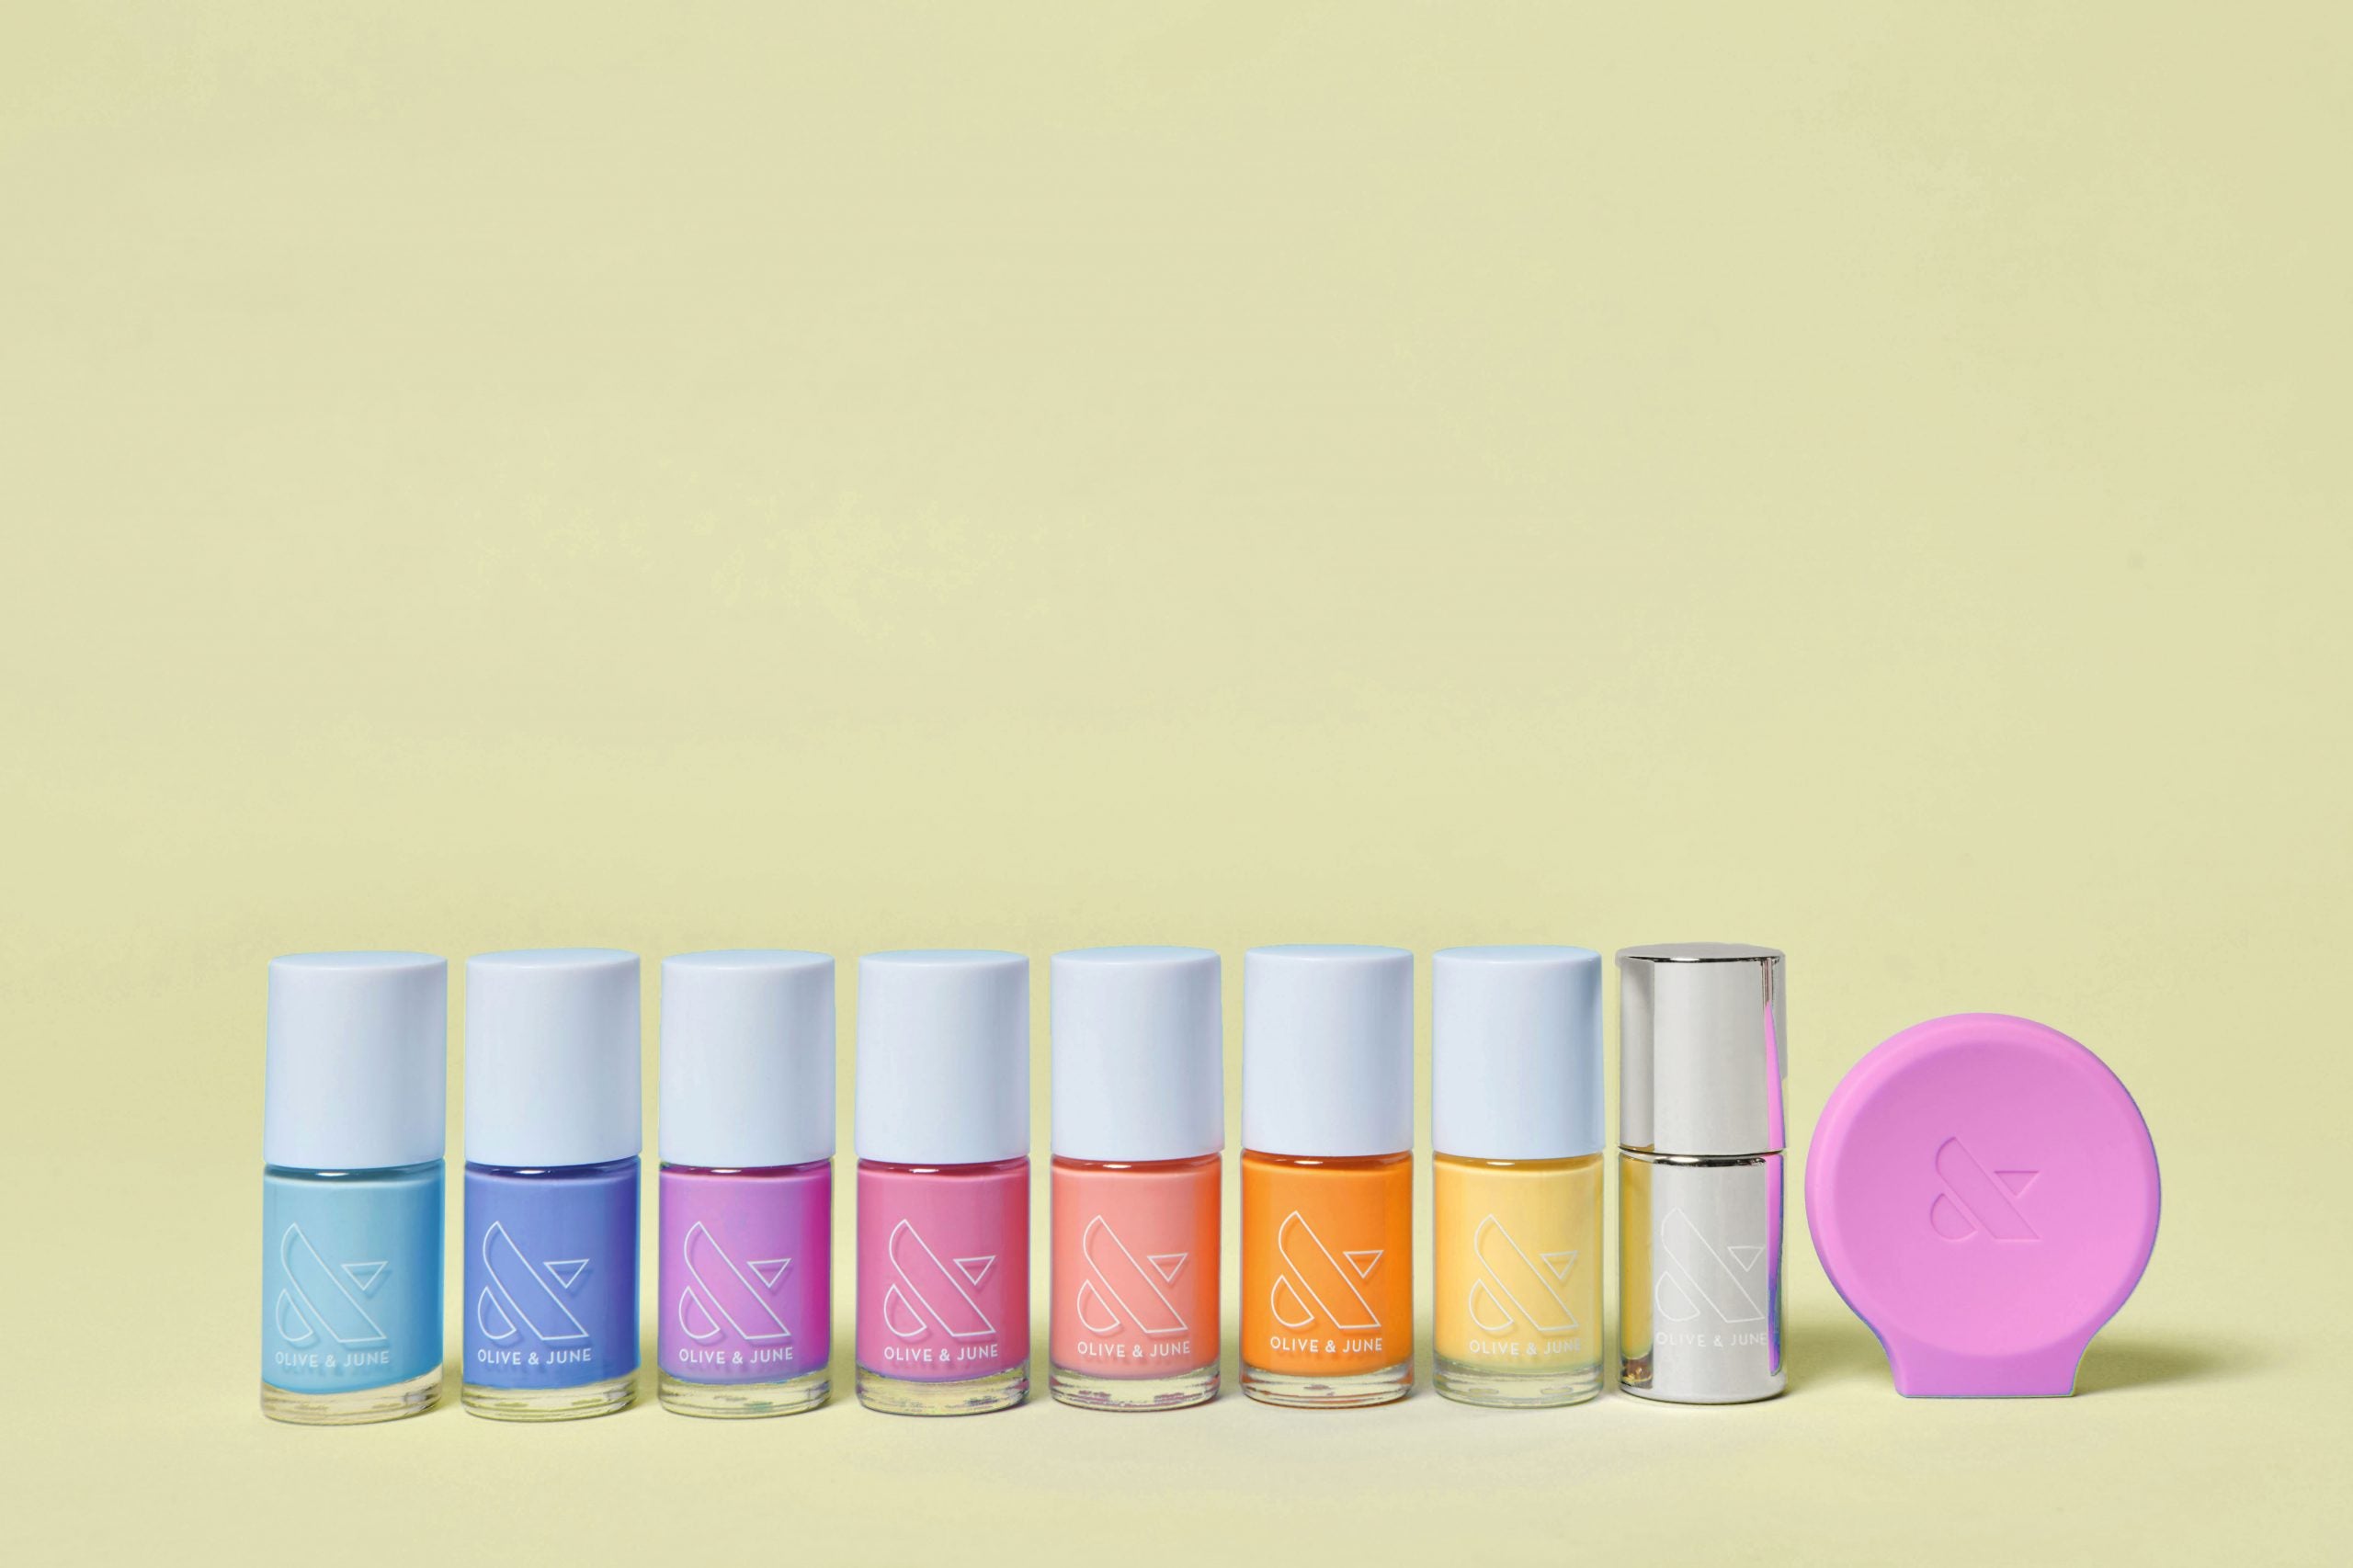 Olive & June's New Nail Polish Collection Will Give You Good Vibes